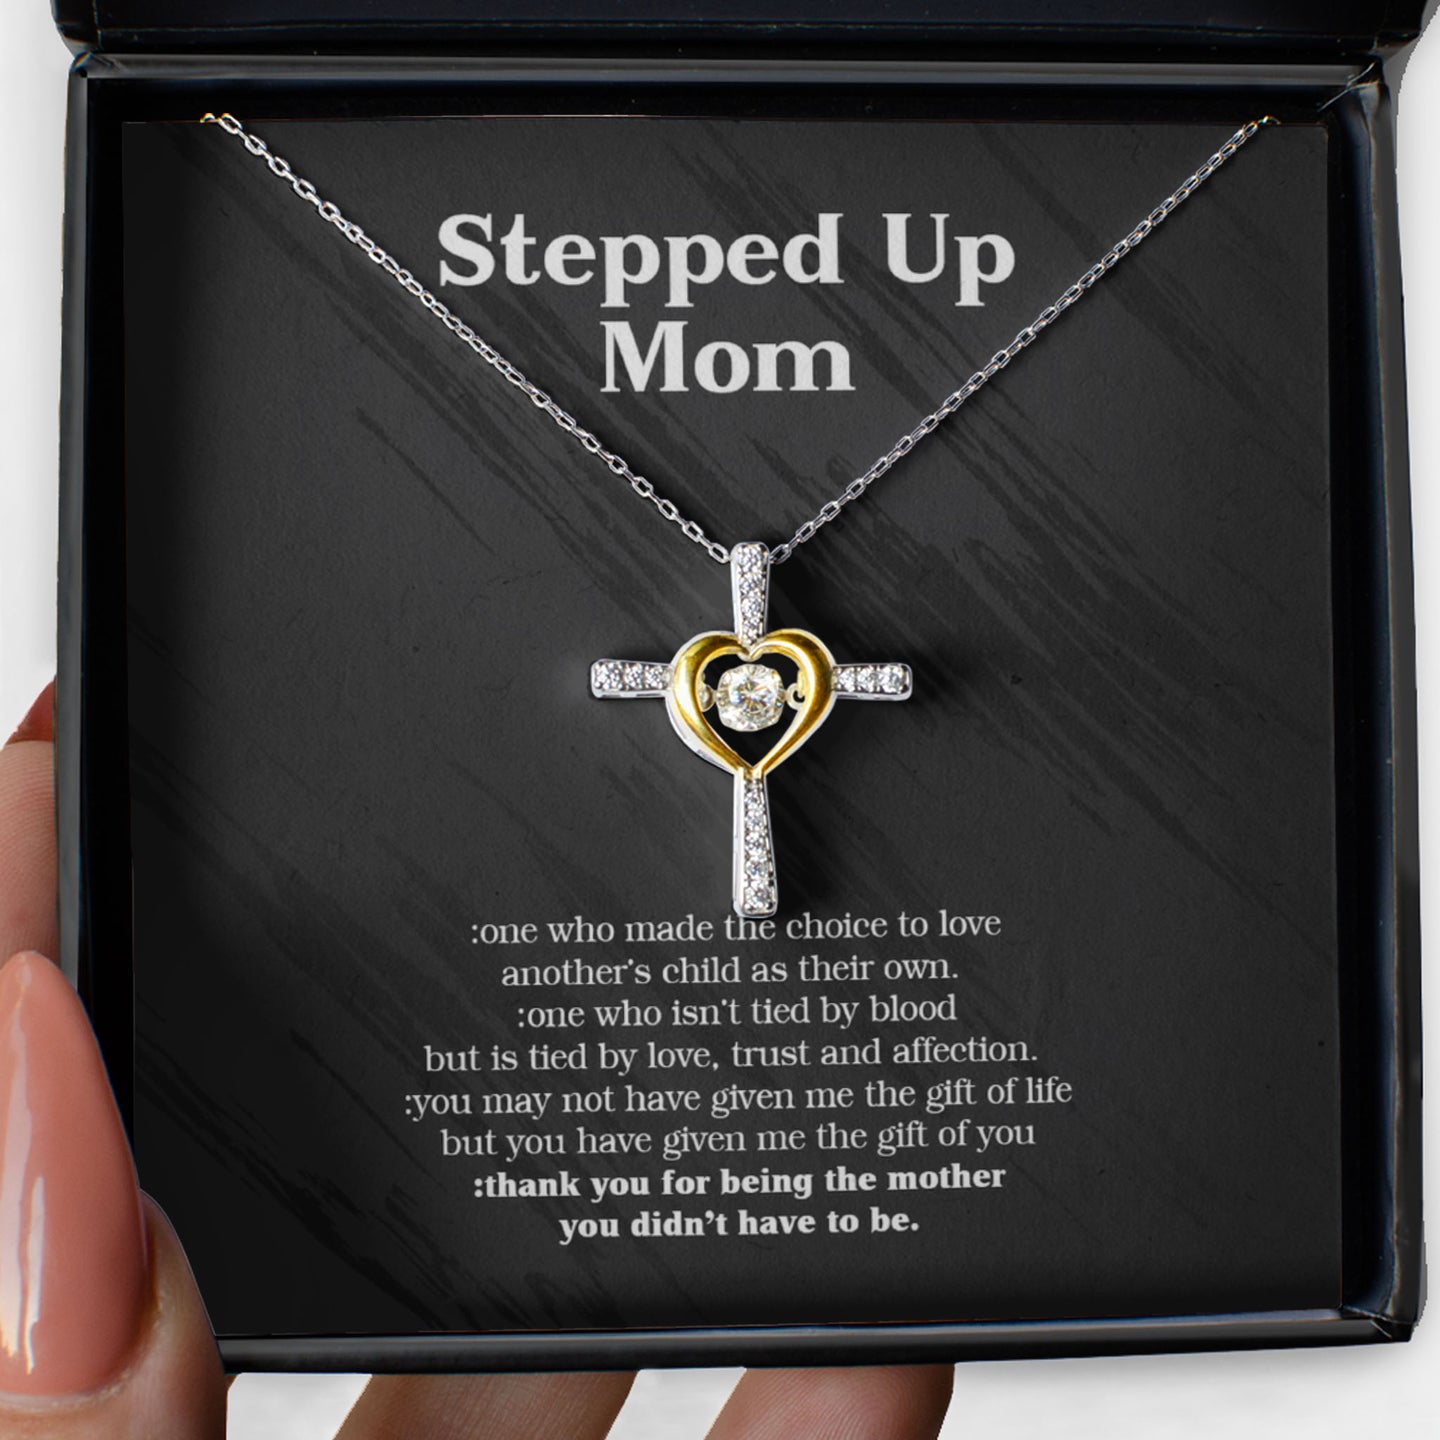 Gift for Stepped Up Mom Cross Dancing Necklace - Thank you for being the mother you didn't have to be - JWshinee